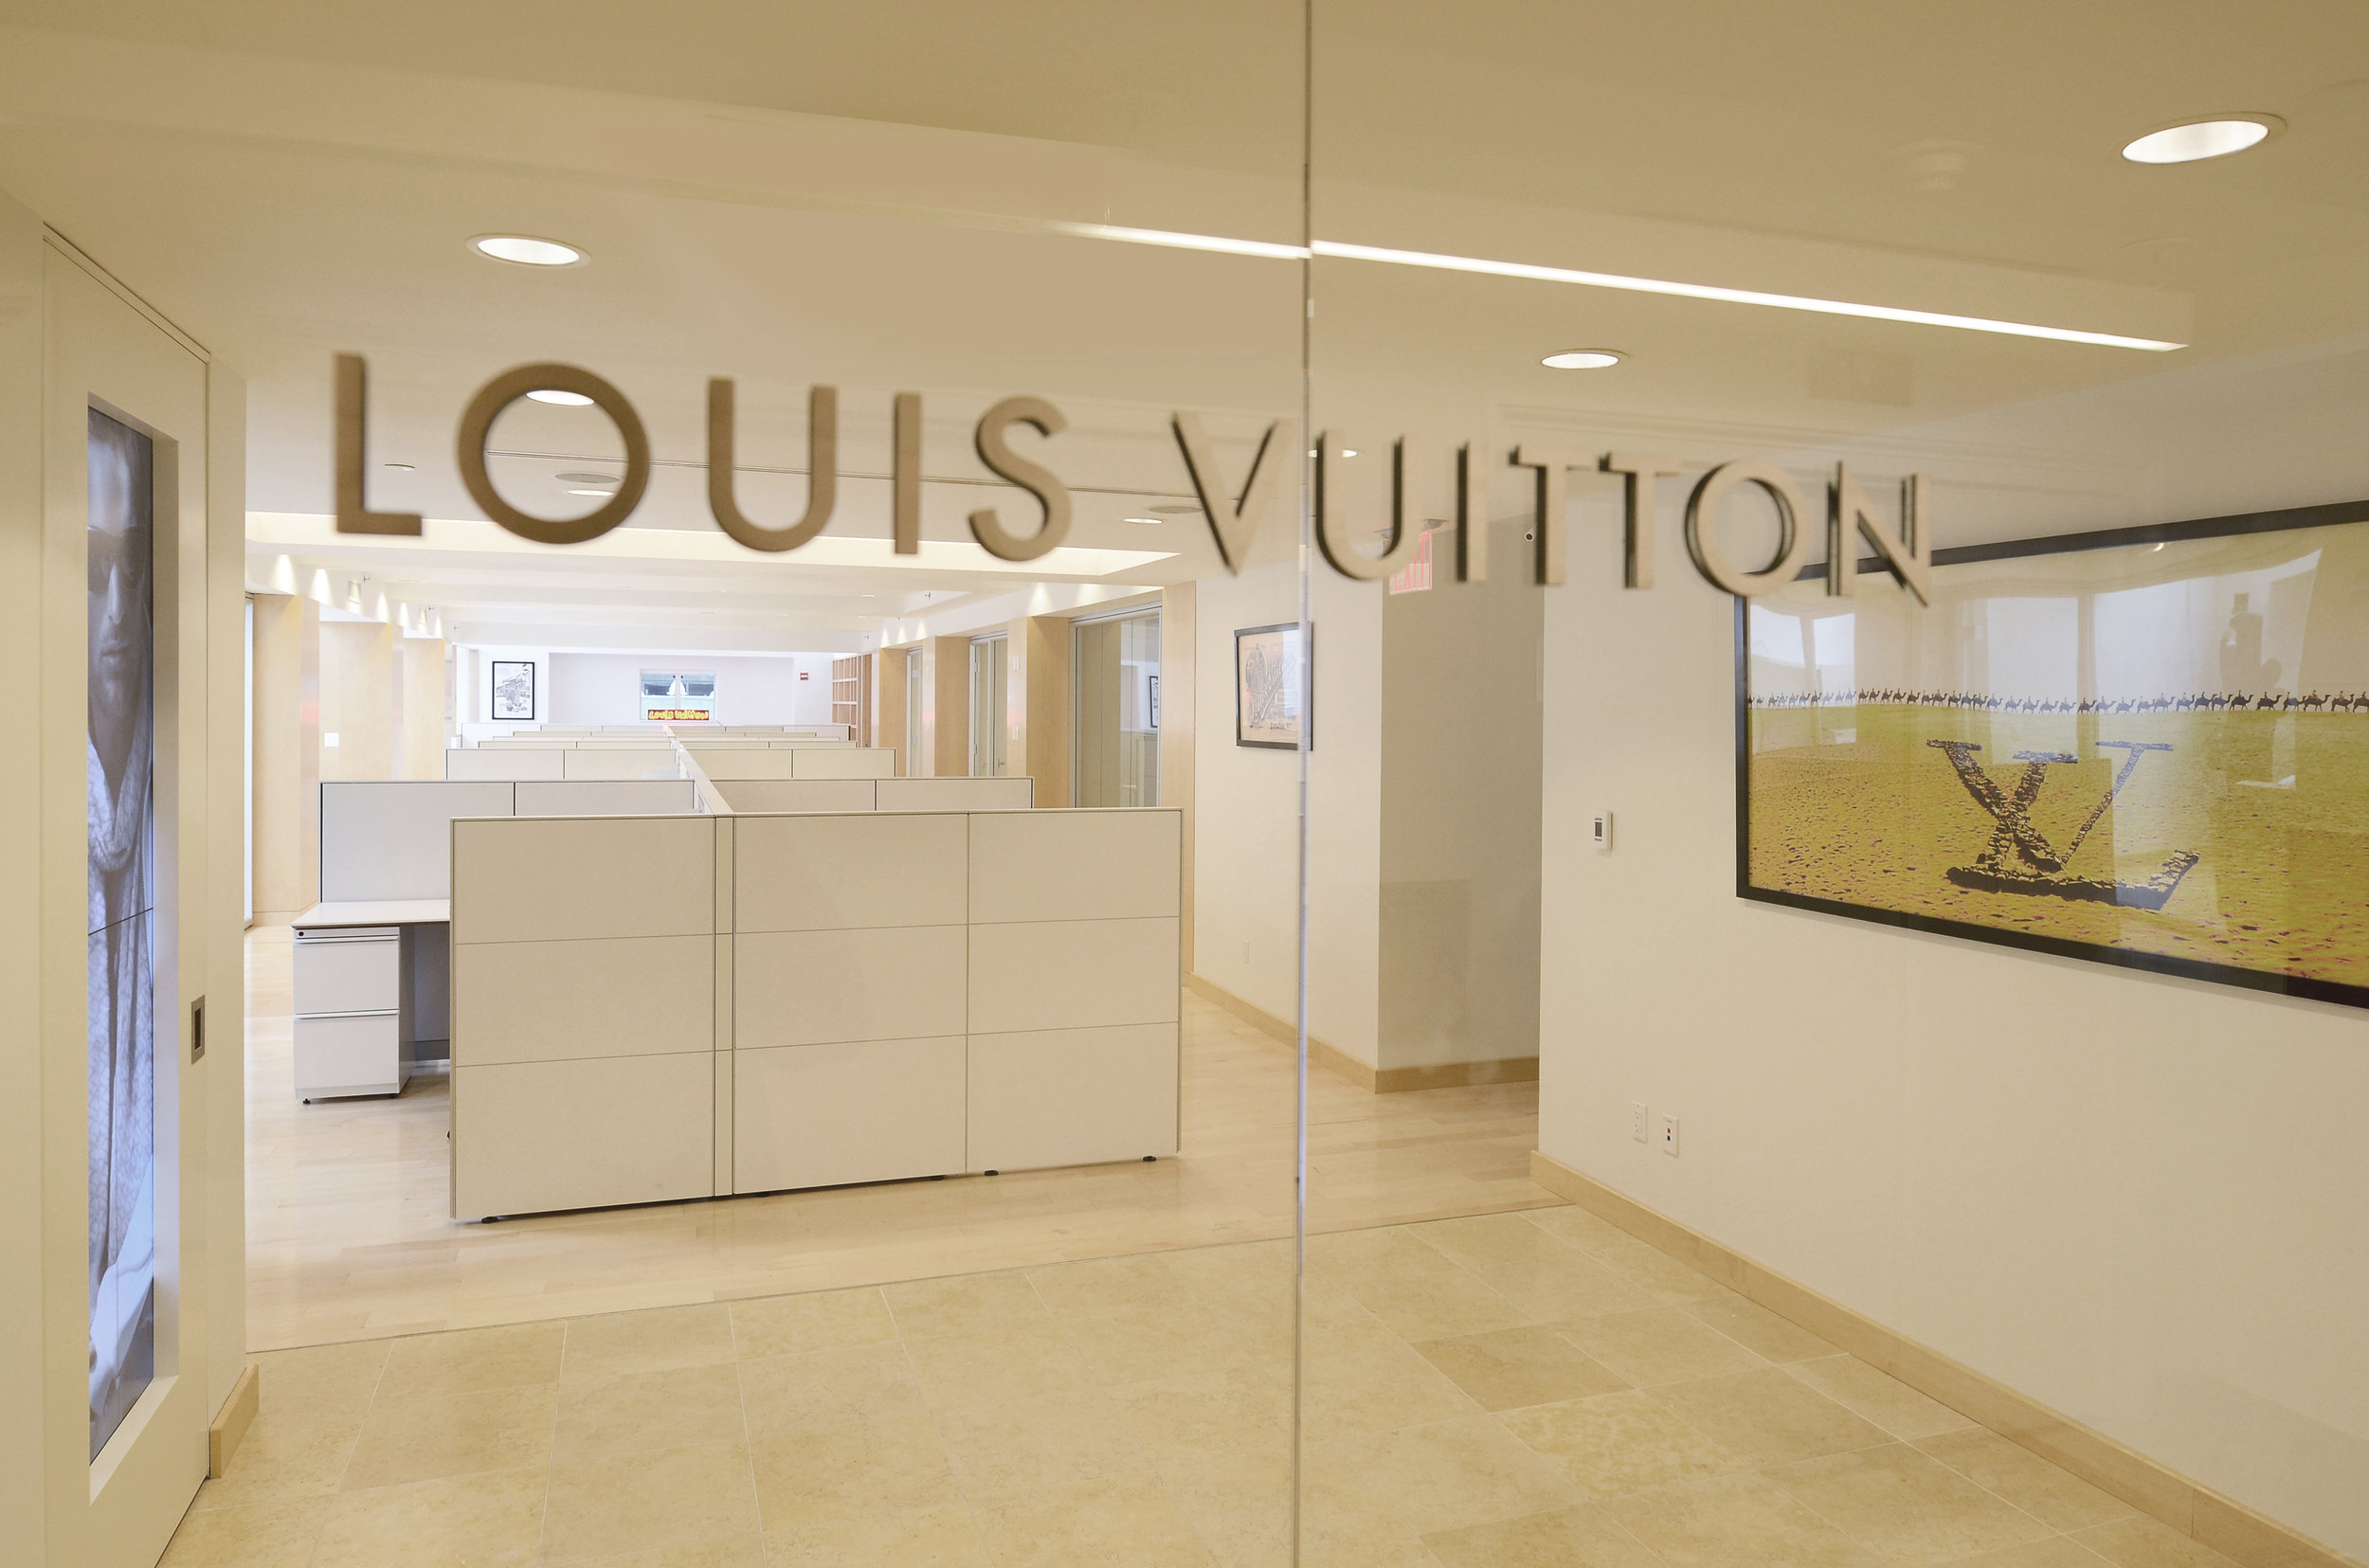 Offices | Louis Vuitton North American Headquarters